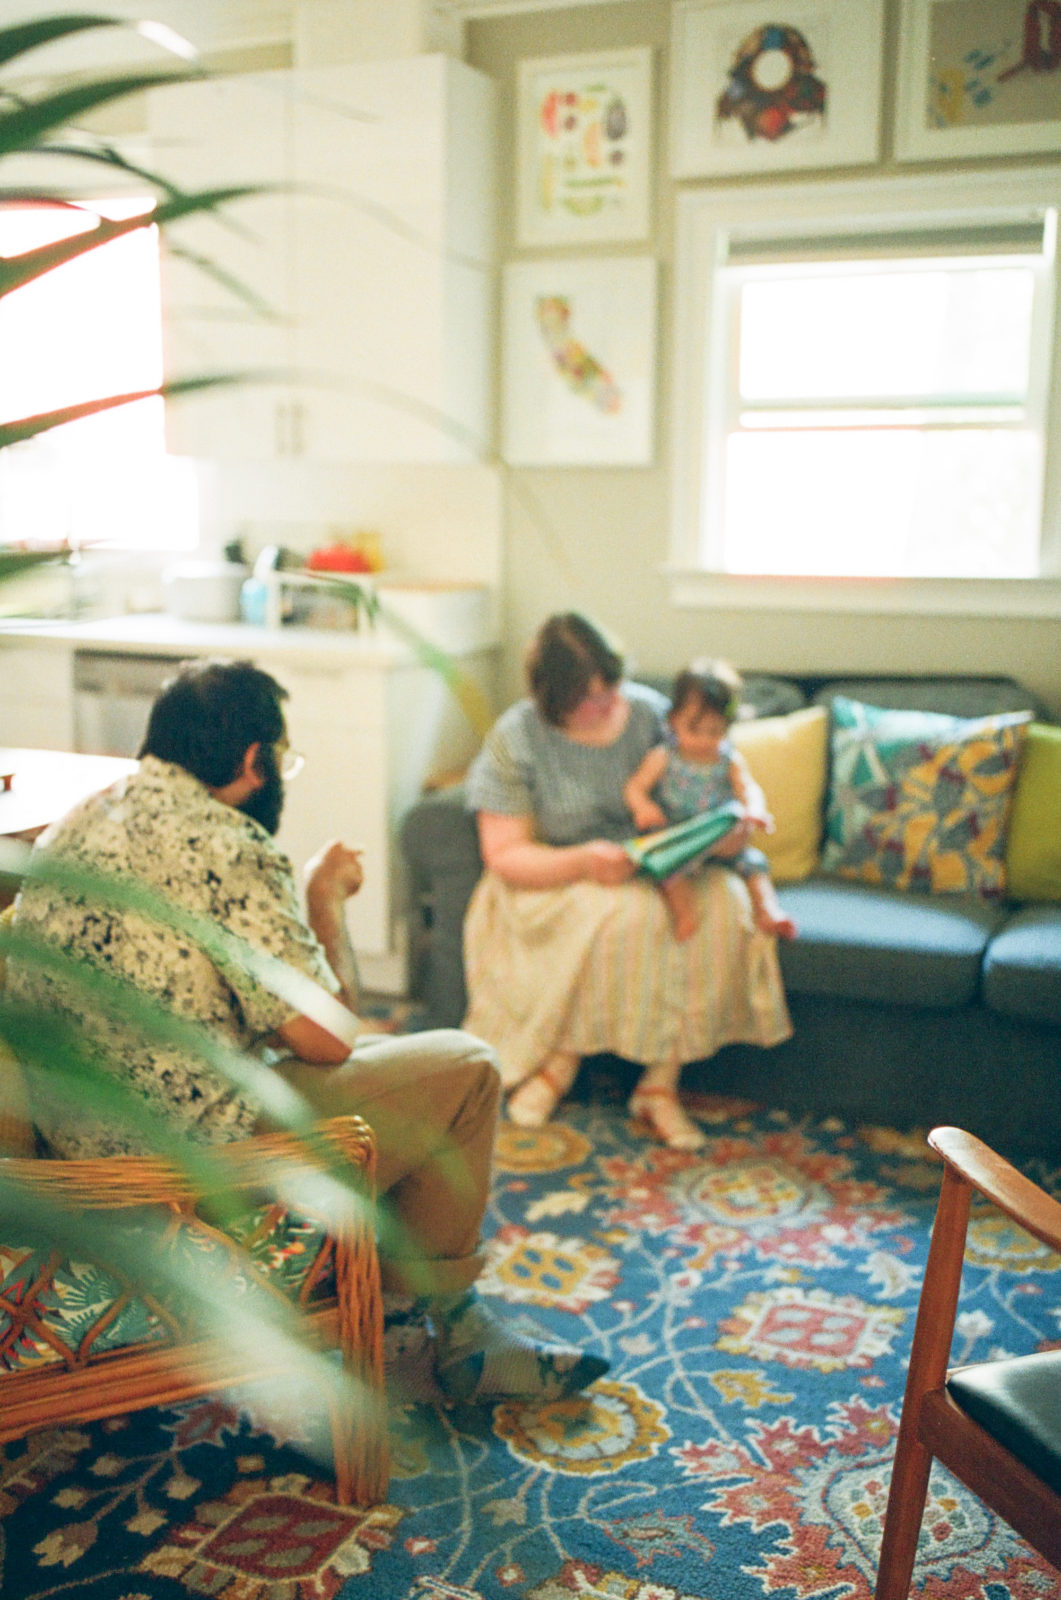 out of focus photo of mom and baby sitting on couch with dad looking on